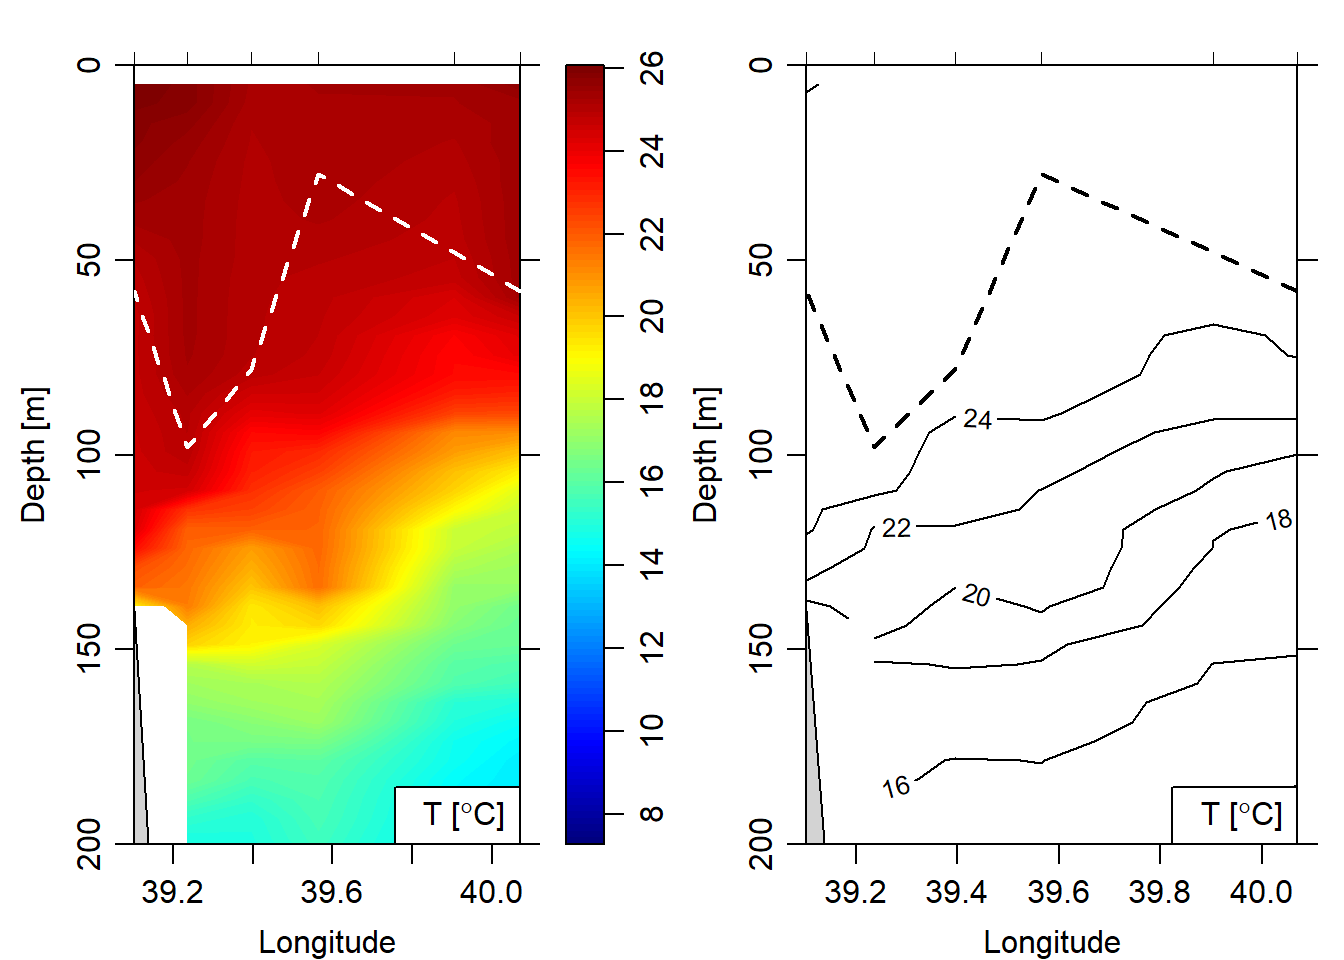 Mixed layer depth (white color) overlaid on the temperature cross section image (left panel) and contour (right panel)